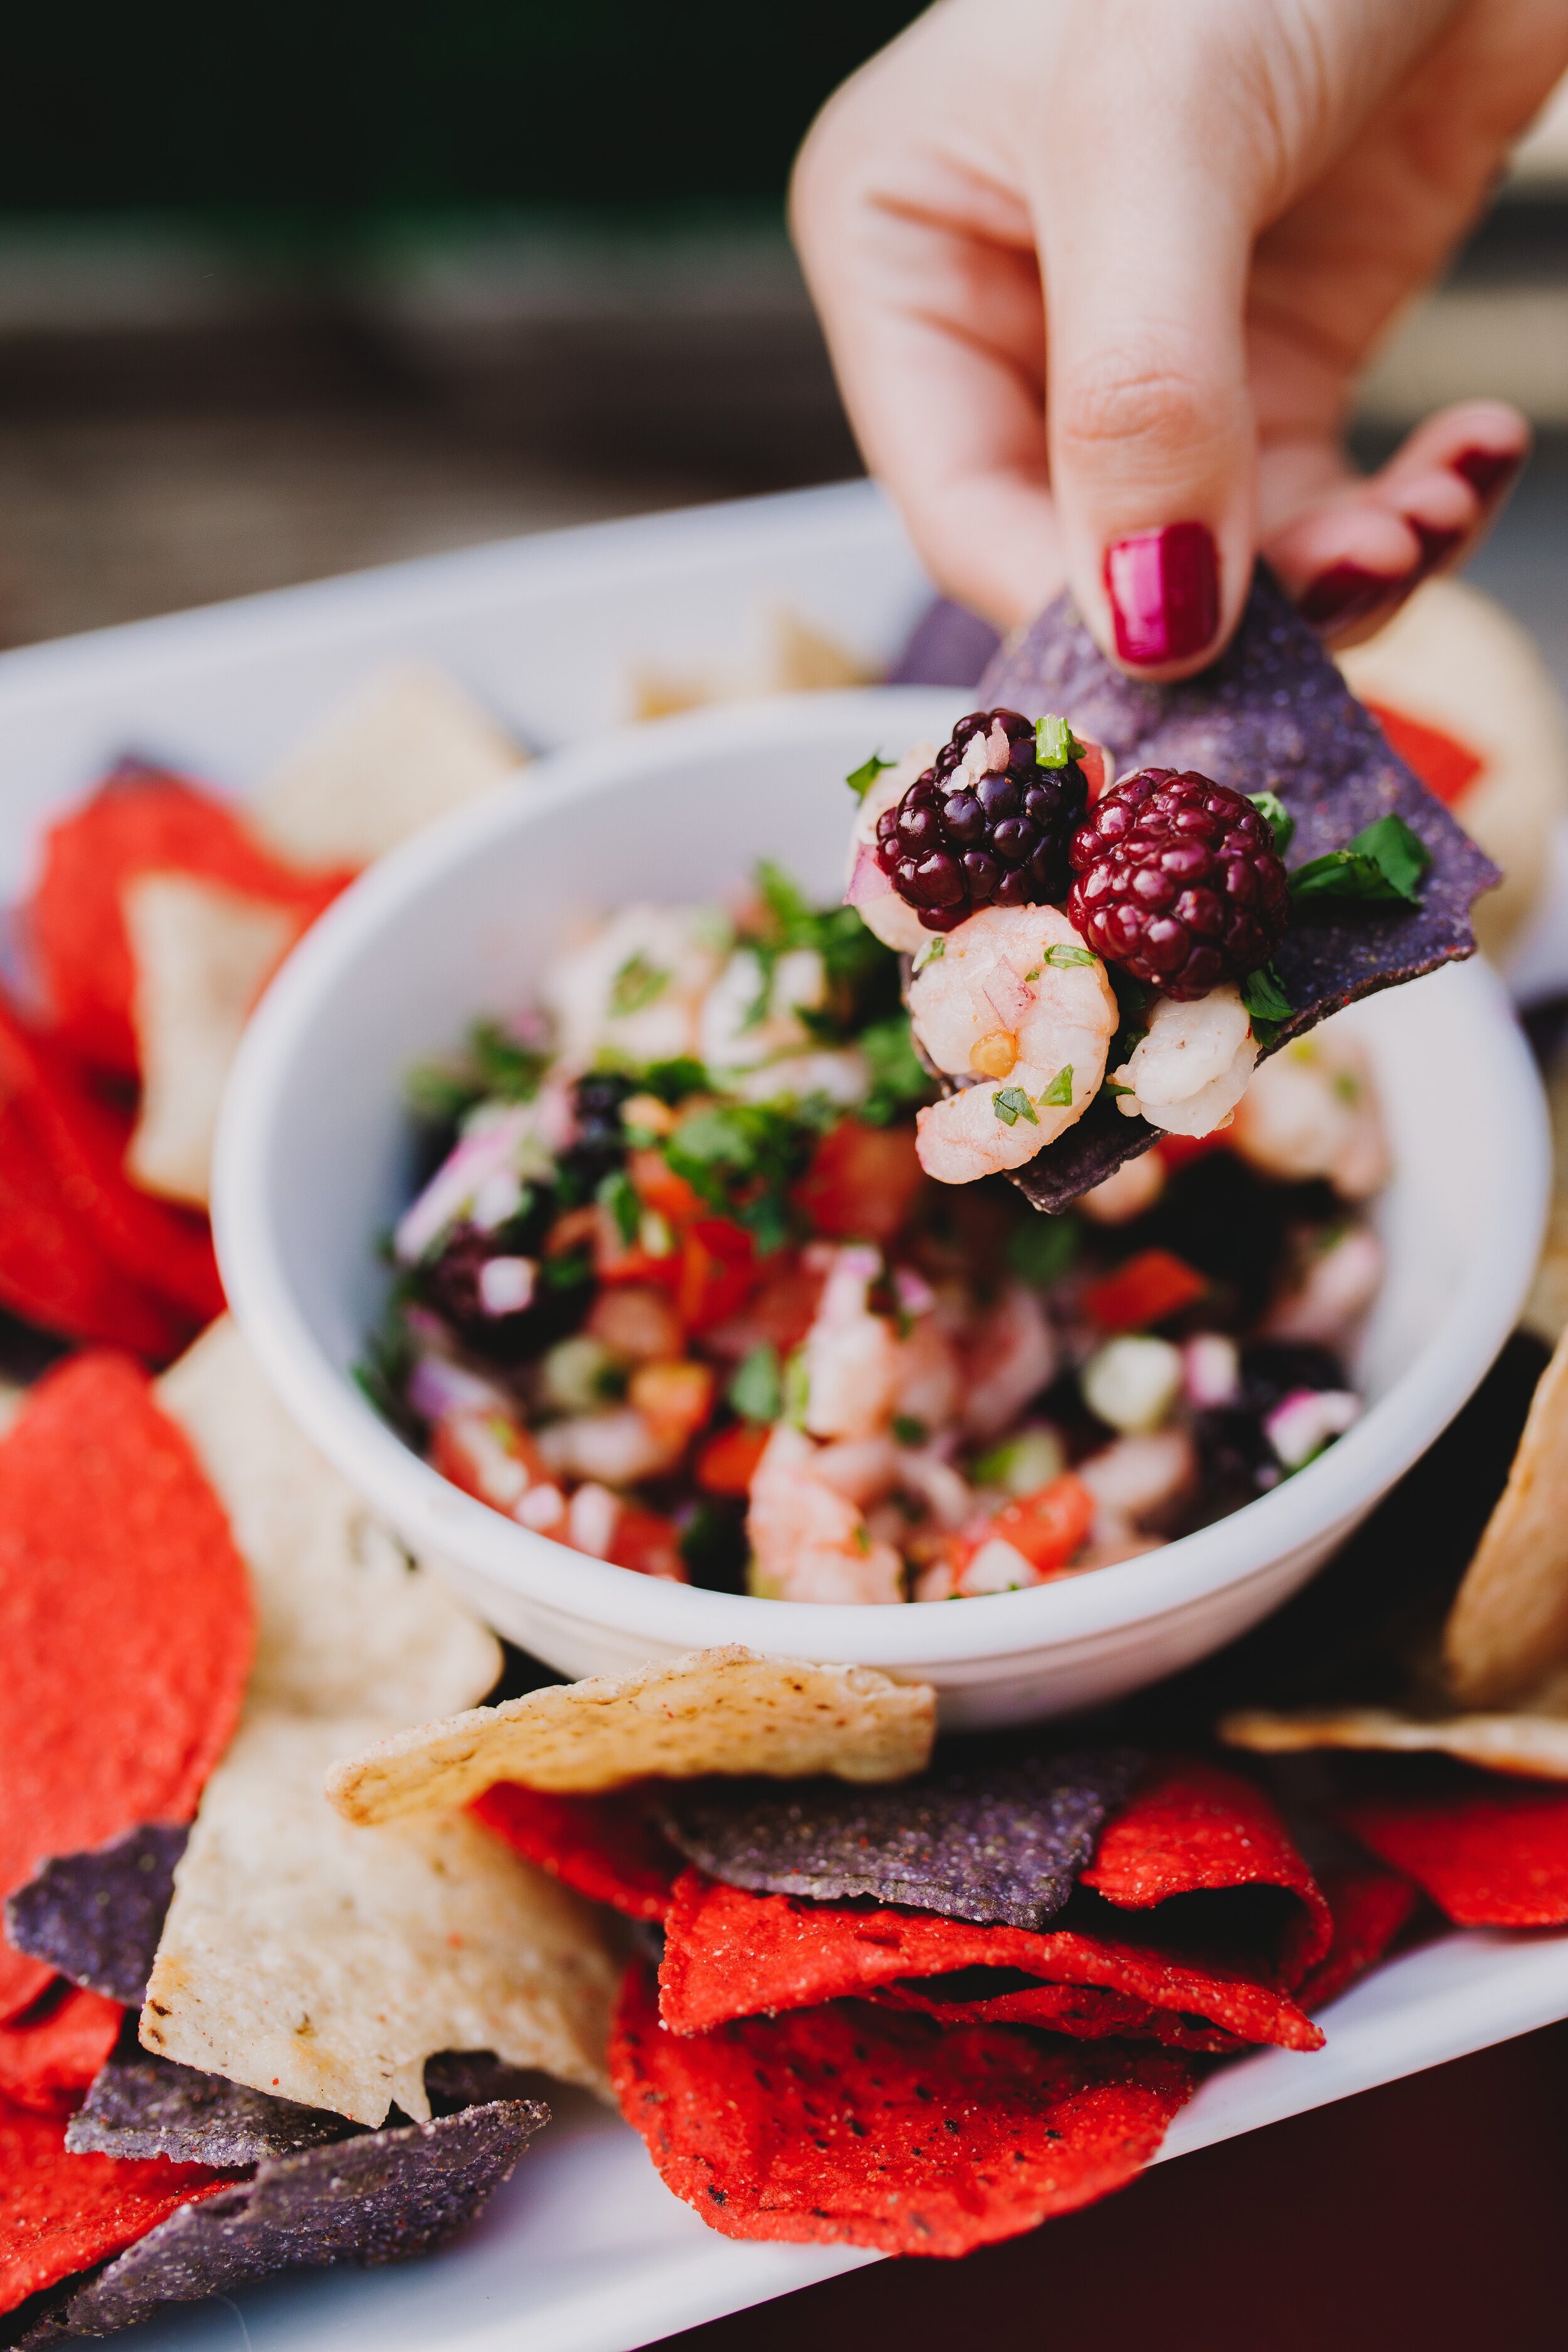 Boysenberry Shrimp Ceviche with Tortilla Chips